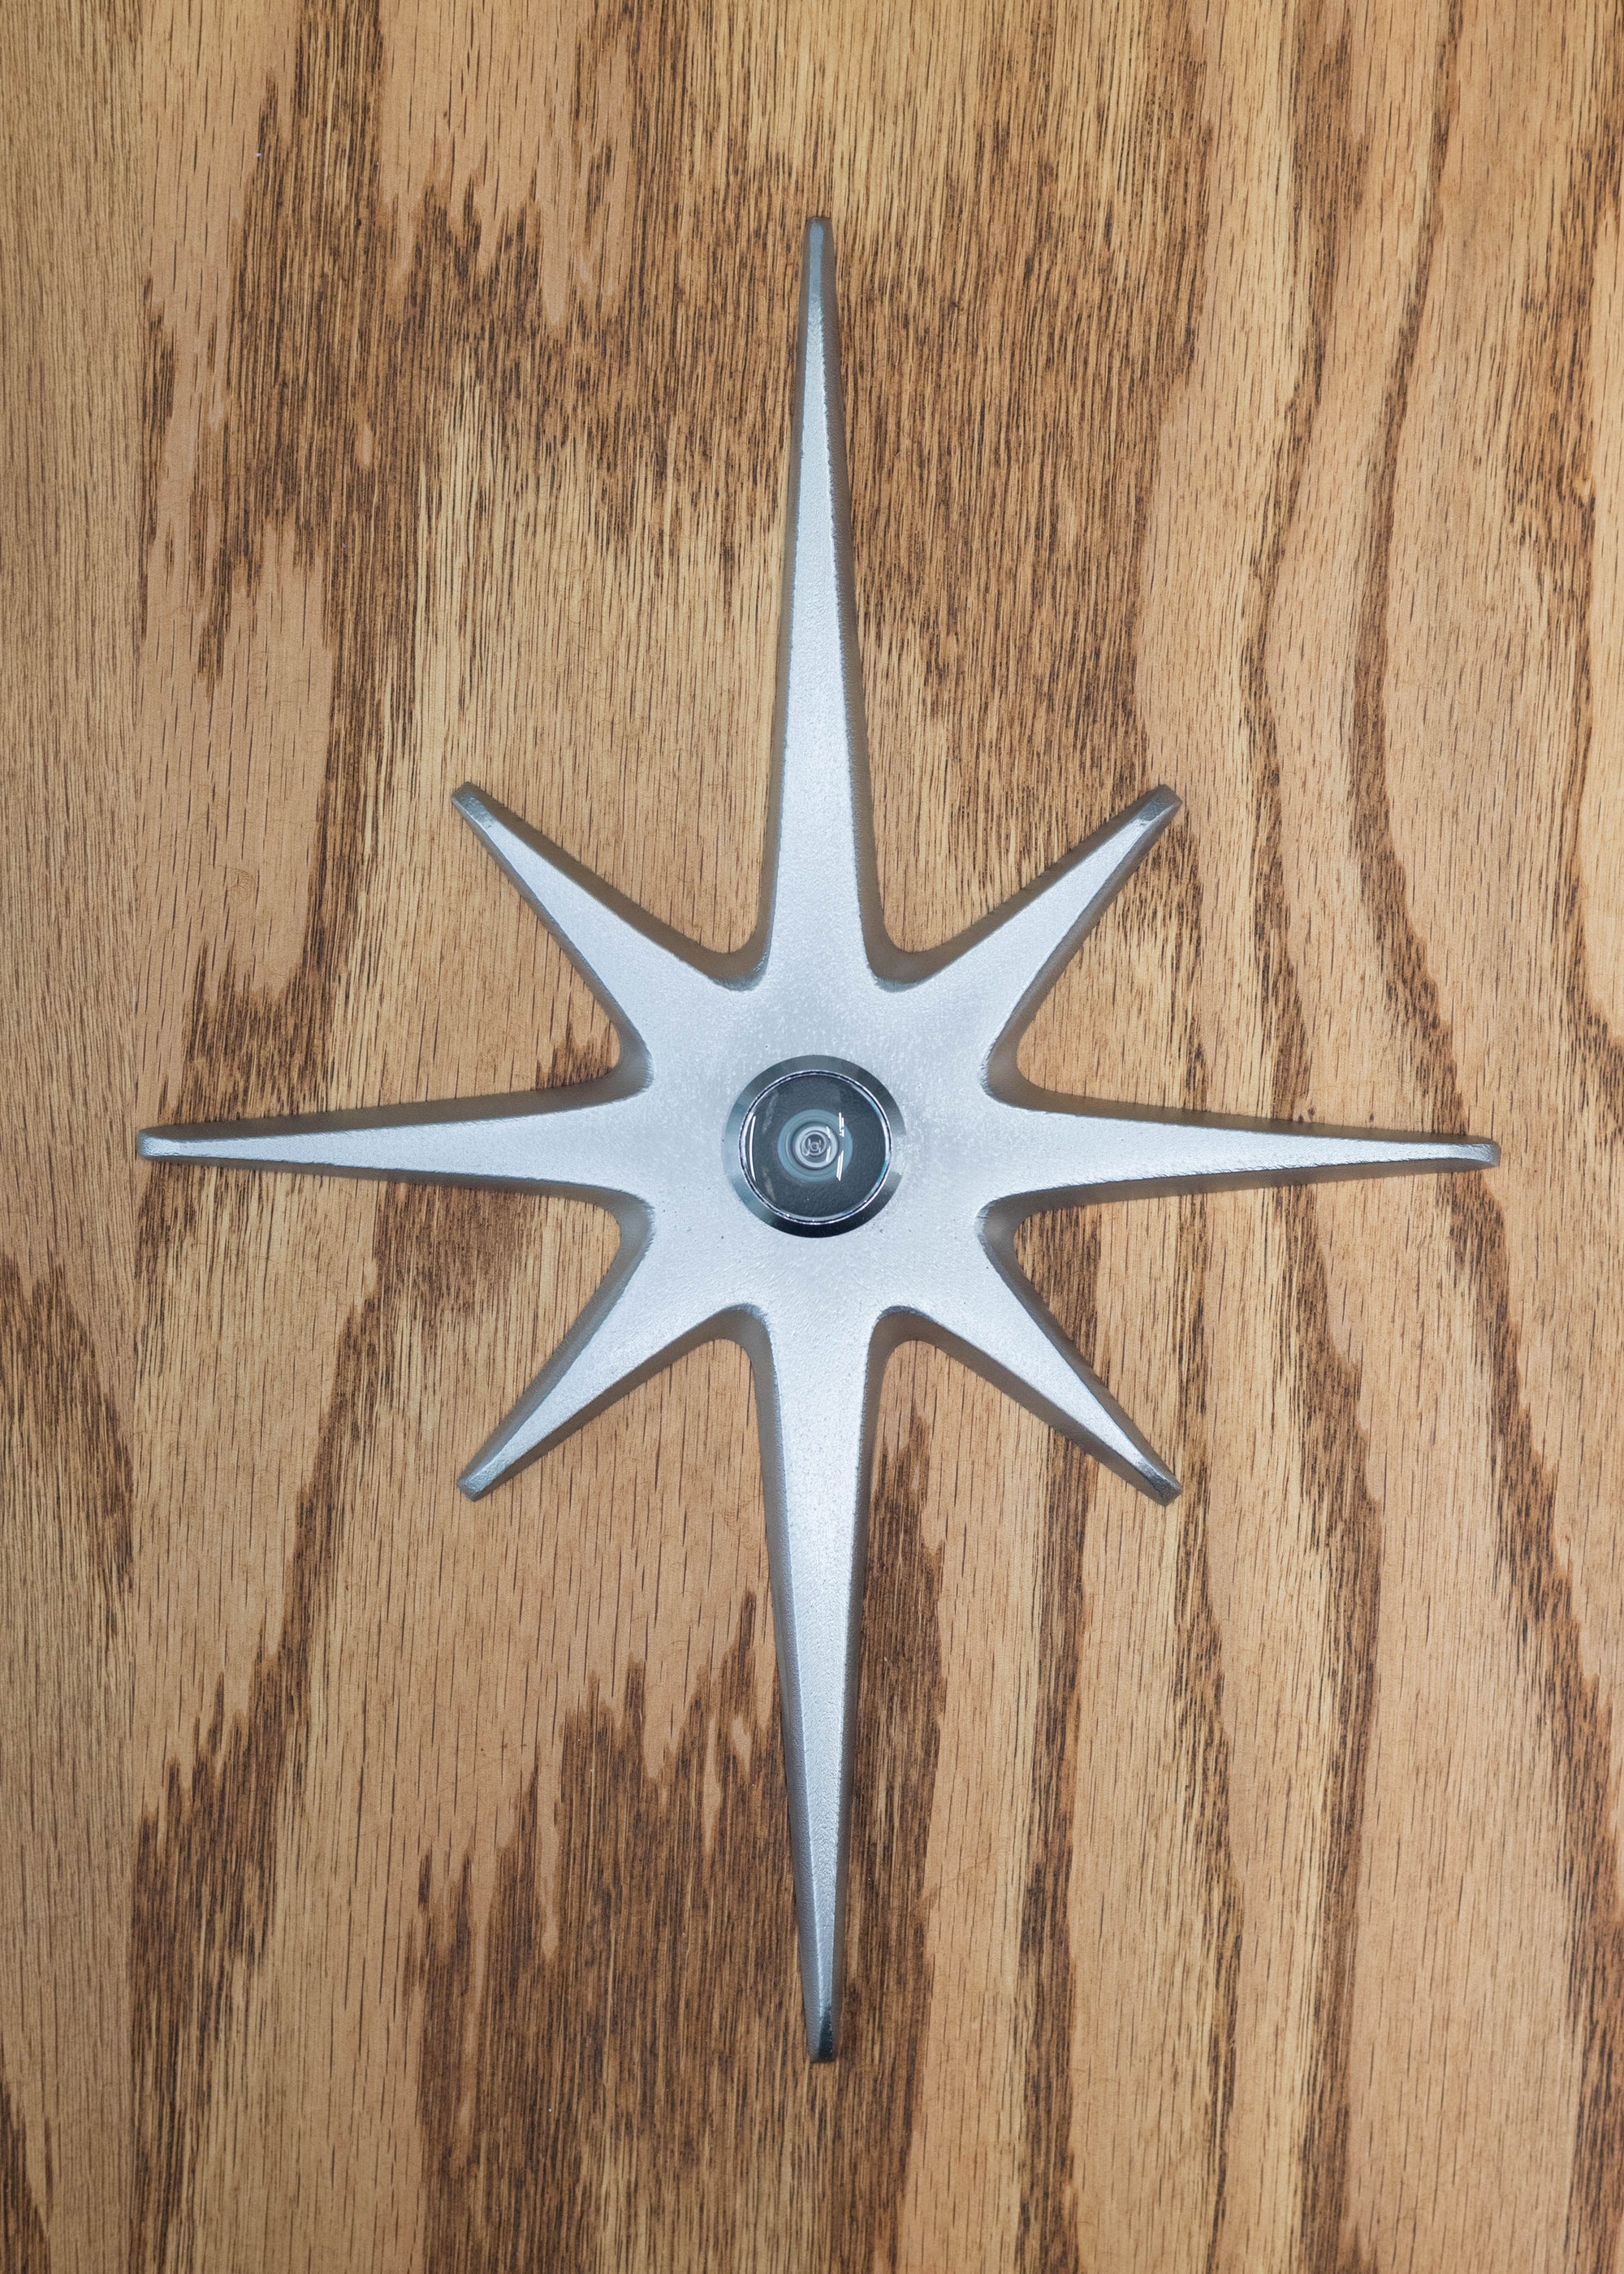 A large cast aluminum starburst with a peephole at the center. This one is natural aluminum with a silver peephole. The natural aluminum is a light silver in color, has a very slight porous texture to it, but is still smooth and gives a matte reflection of light.